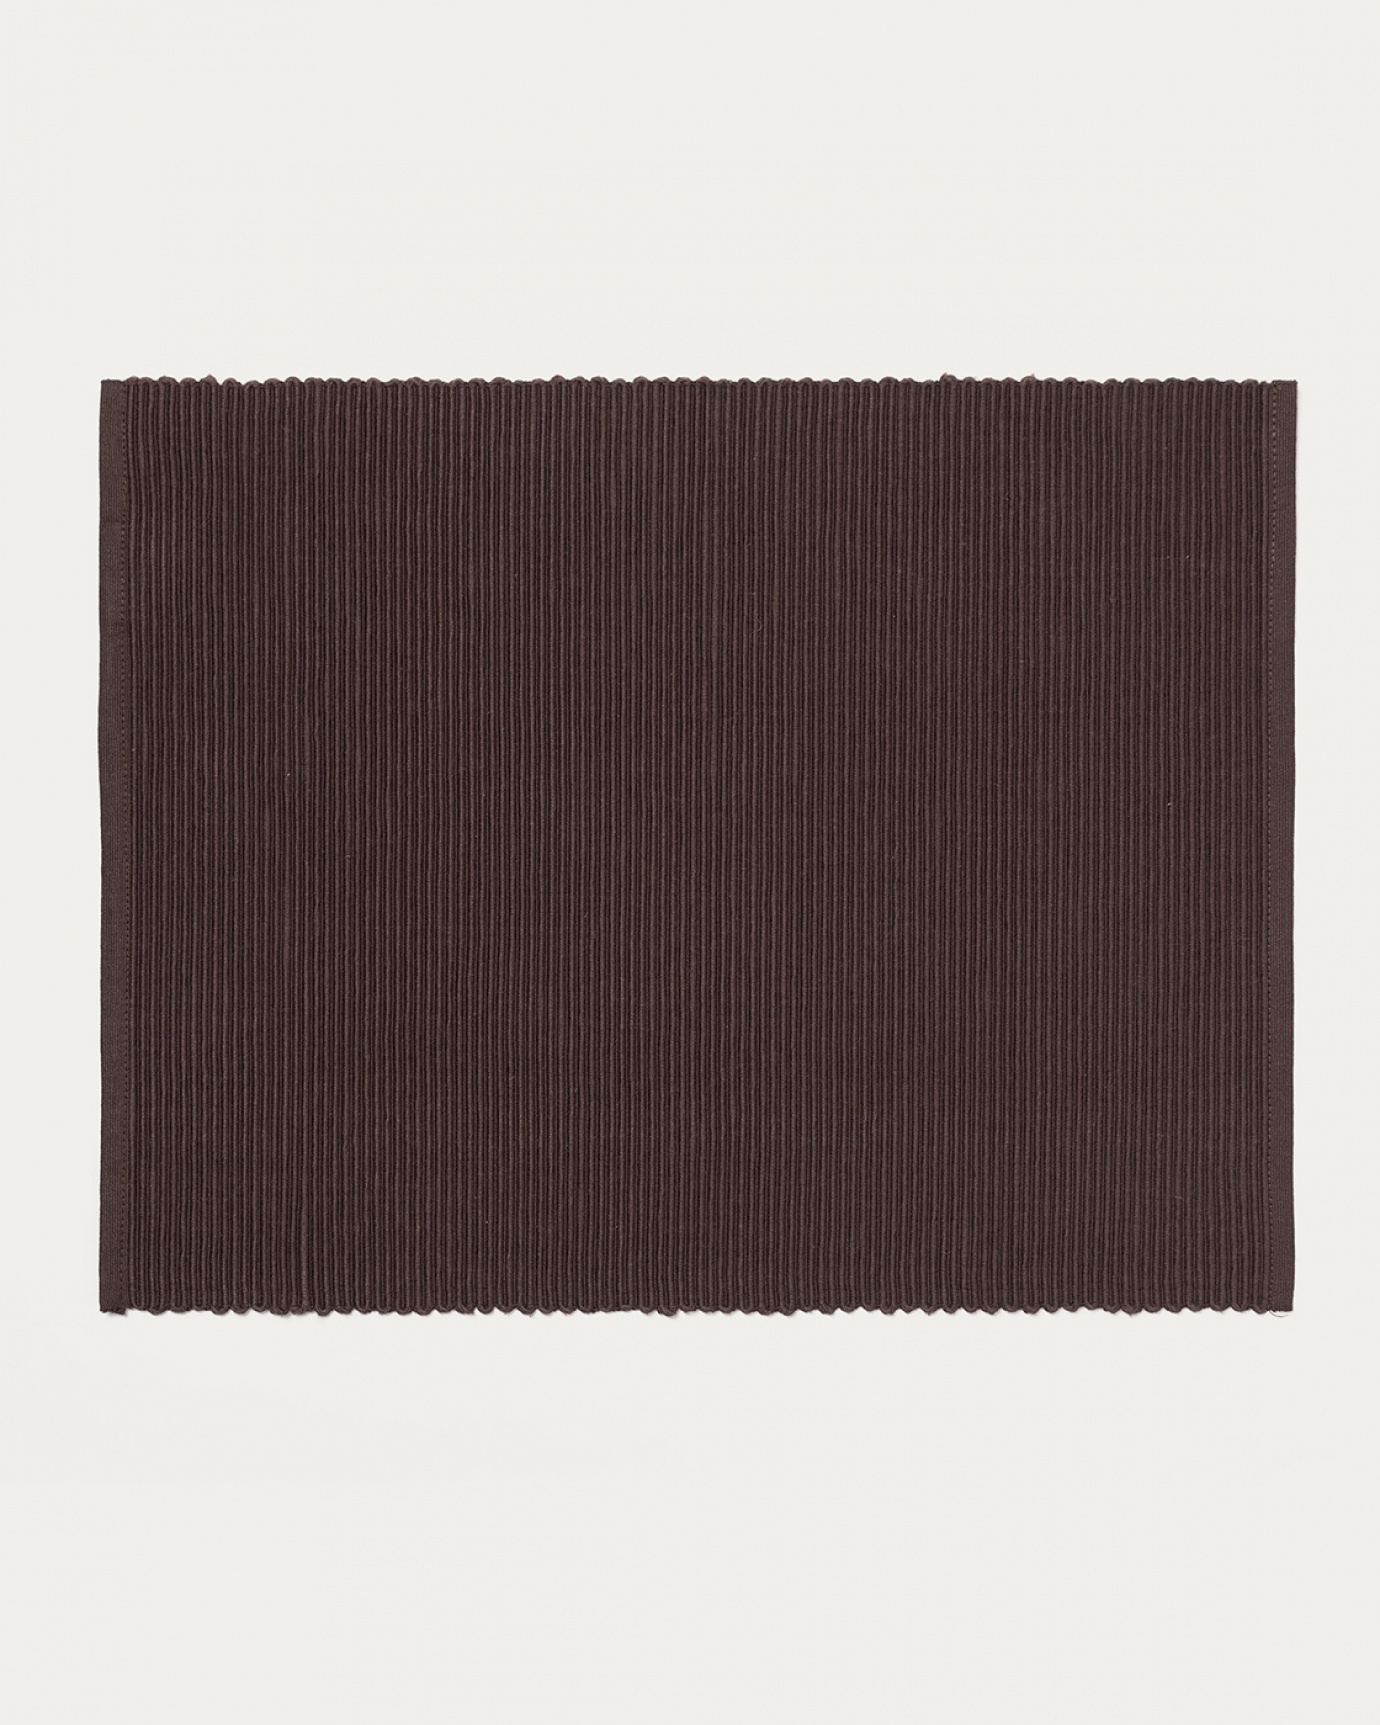 Product image dark brown UNI placemat made of soft cotton in ribbed quality from LINUM DESIGN. Size 35x46 cm and sold in 1-pack.